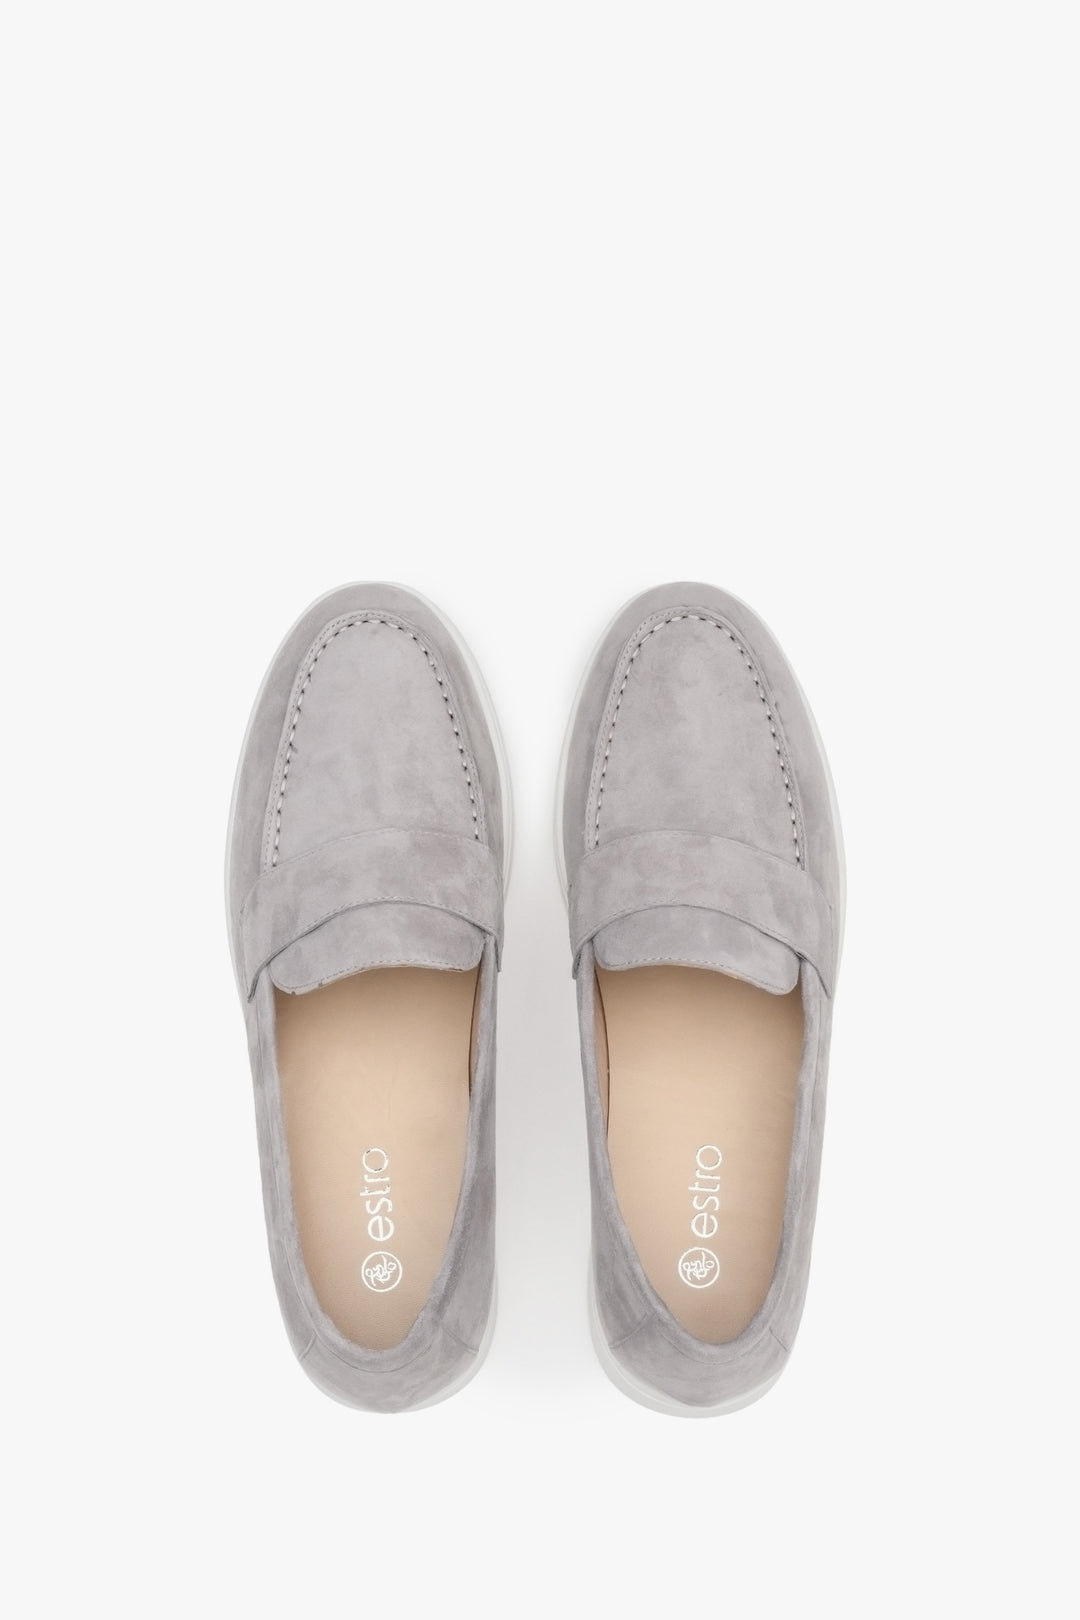 Women's grey Estro moccasins for fall, made of genuine velour - presentation of footwear from above.